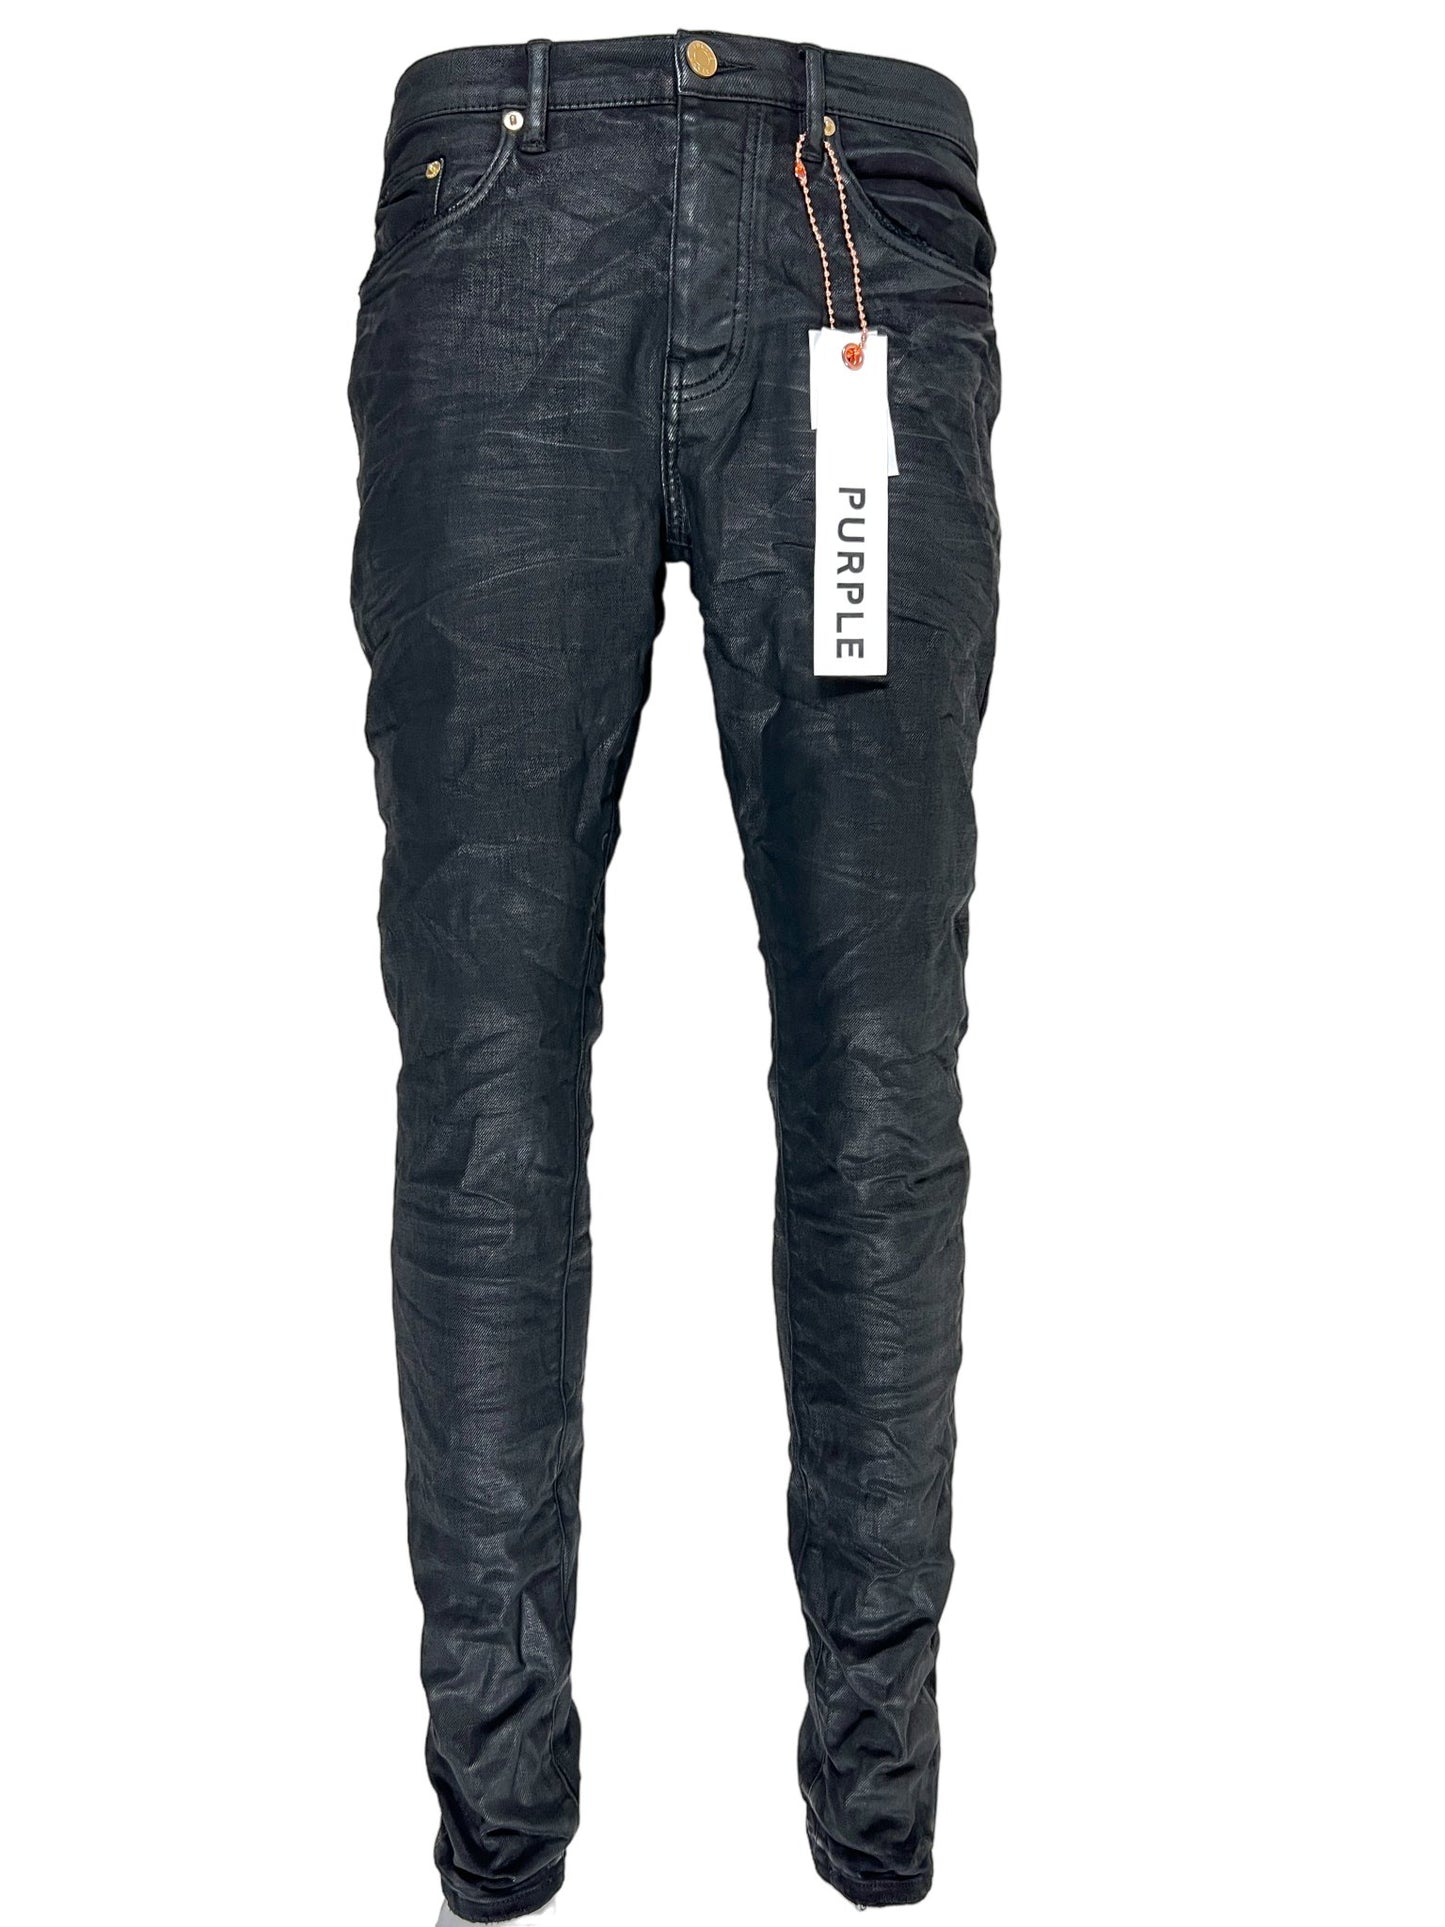 A pair of slim fit black jeans with a tag on them from the luxury PURPLE BRAND JEANS P001-BCRB MIDNIGHT COATED BLACK collection.